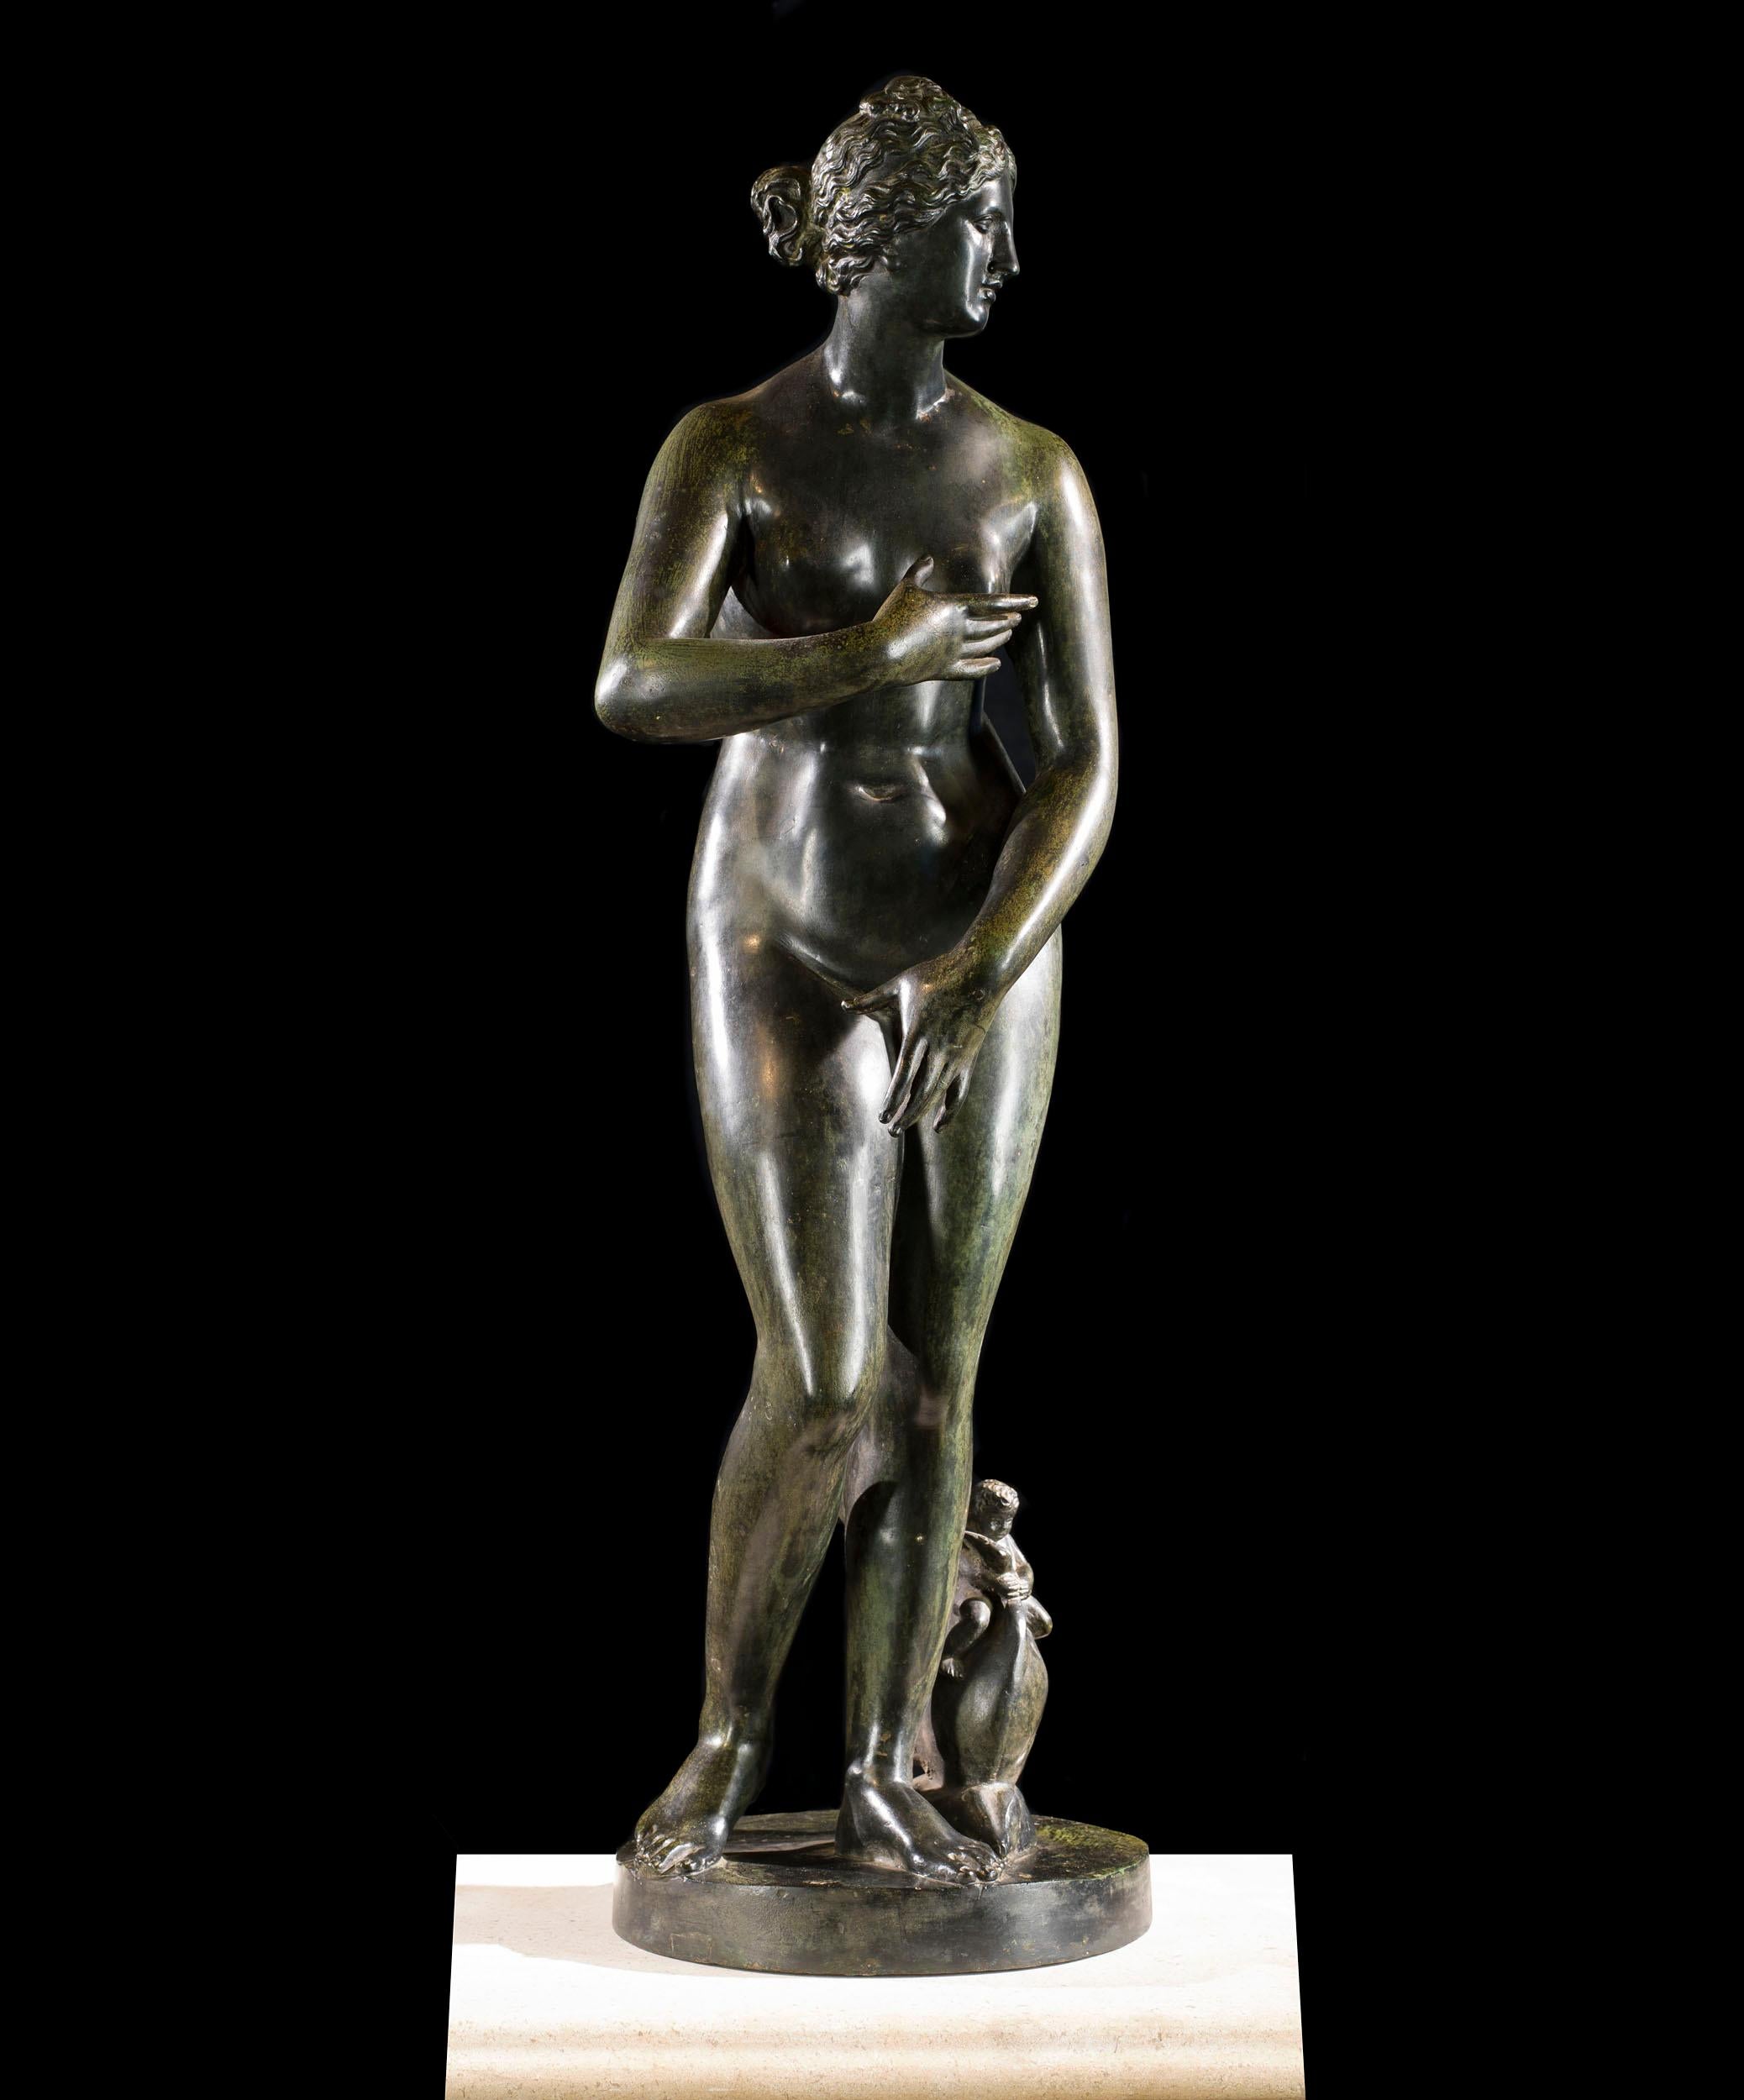 A fine late 19th century Neapolitan patinated bronze figure of the Venus de Medici after the antique. Likely cast by the Fonderia Sommer, Naples. The Fonderia Sommer offered three different types of patination on their bronzes, as this exmaple